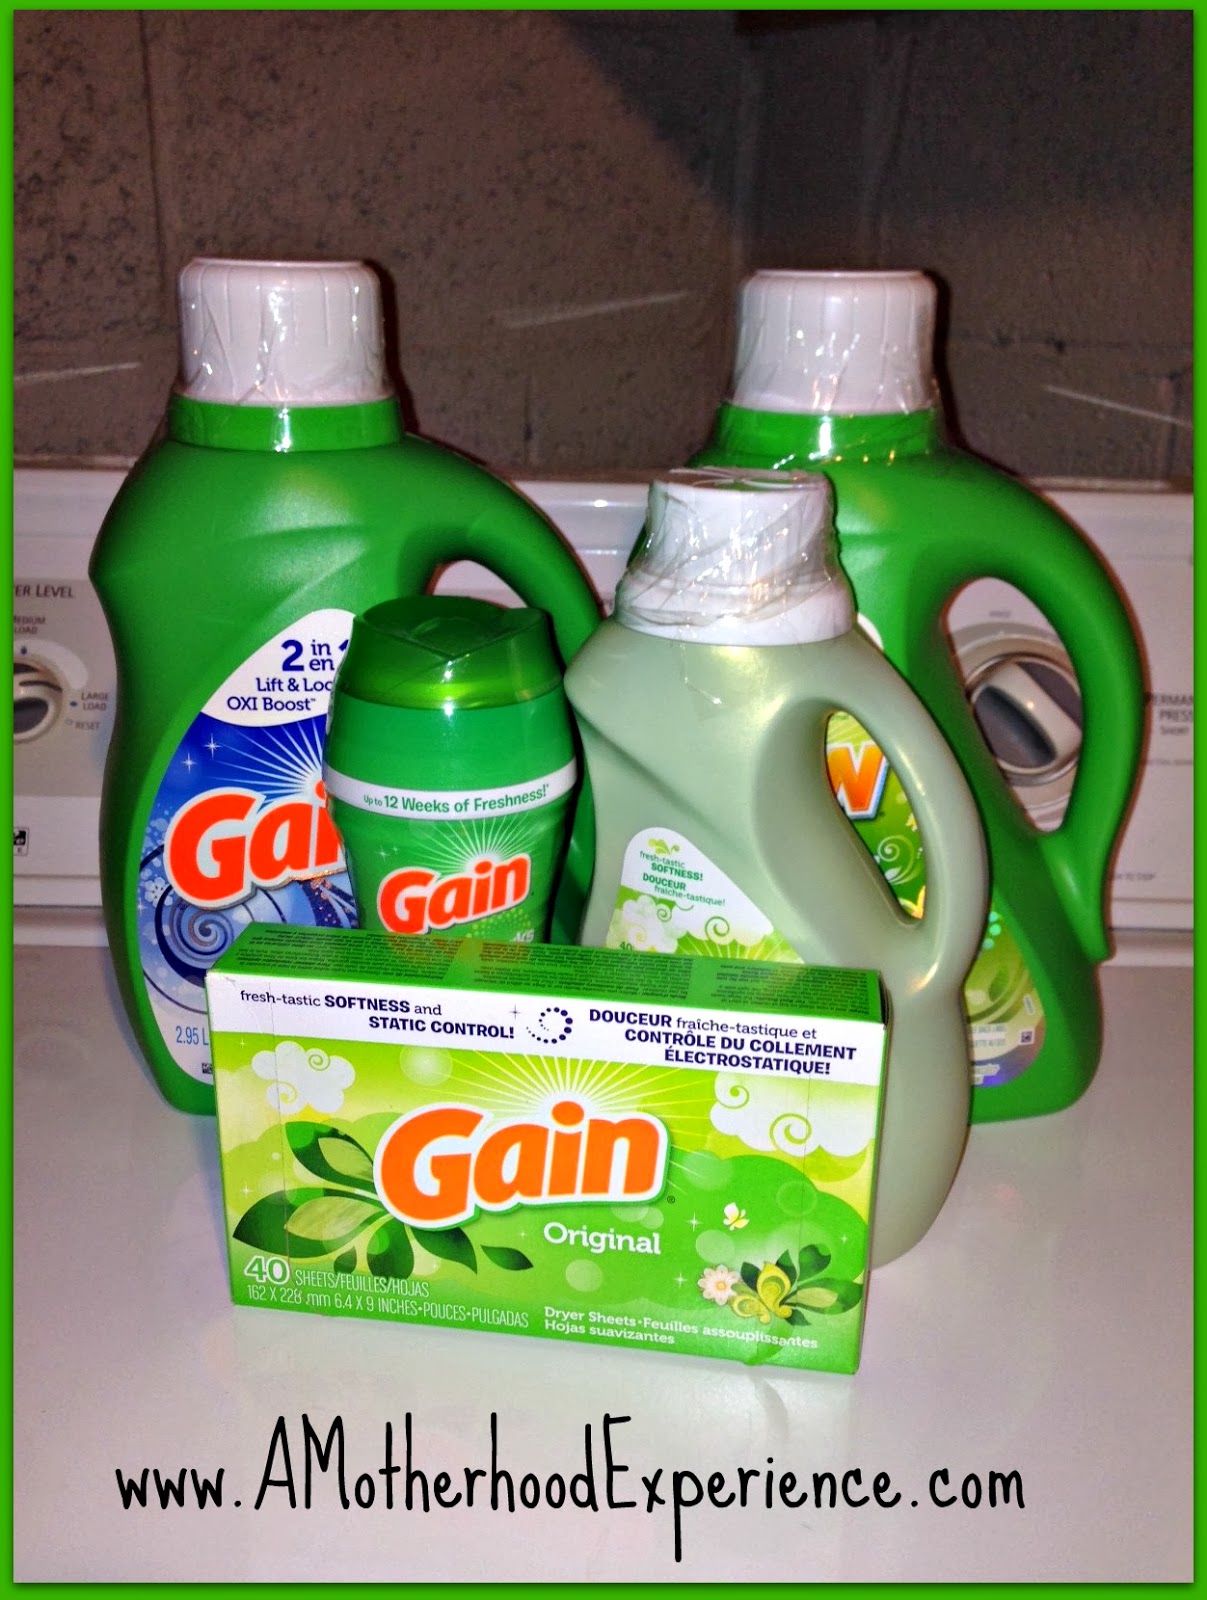 New Scentsational Singles from Gain! ~ A MotherHood Experience